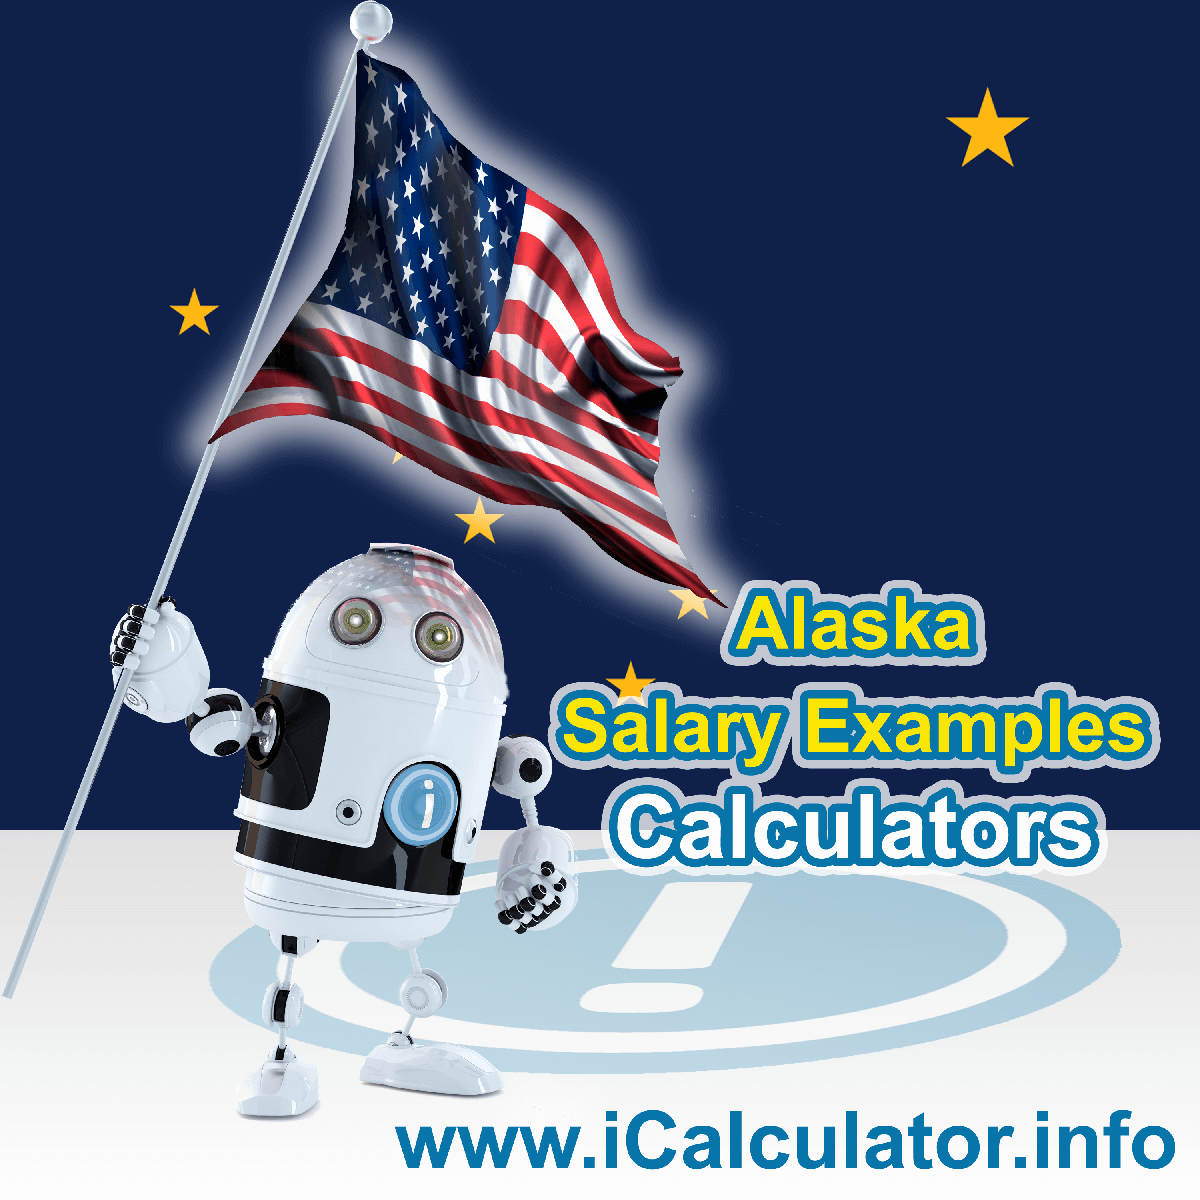 Alaska Salary Example for $ 125,000.00 in 2023 | iCalculator™ | $ 125,000.00 salary example for employee and employer paying Alaska State tincome taxes. Detailed salary after tax calculation including Alaska State Tax, Federal State Tax, Medicare Deductions, Social Security, Capital Gains and other income tax and salary deductions complete with supporting Alaska state tax tables 